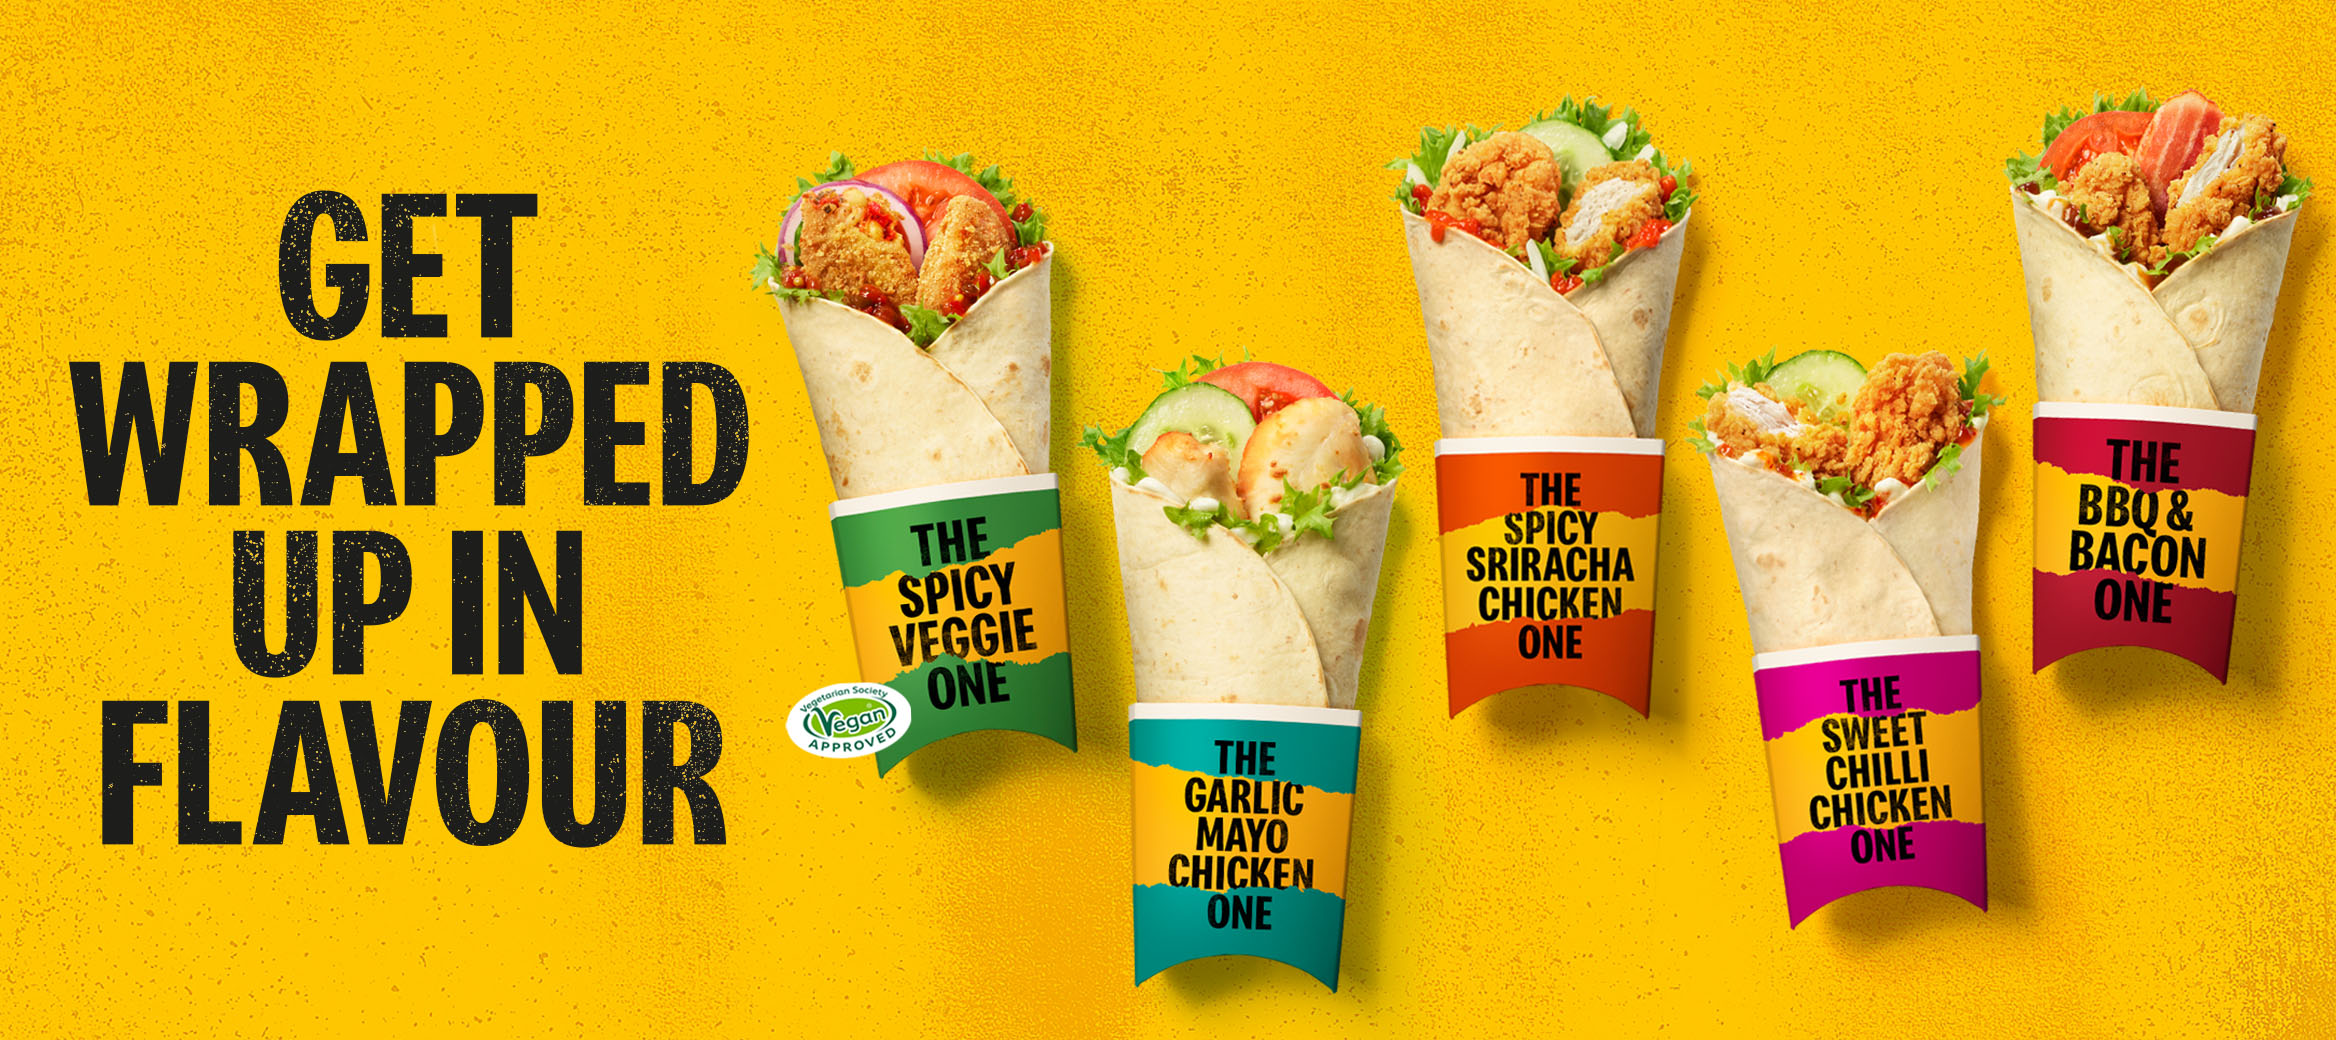 Get Wrapped up in Flavour